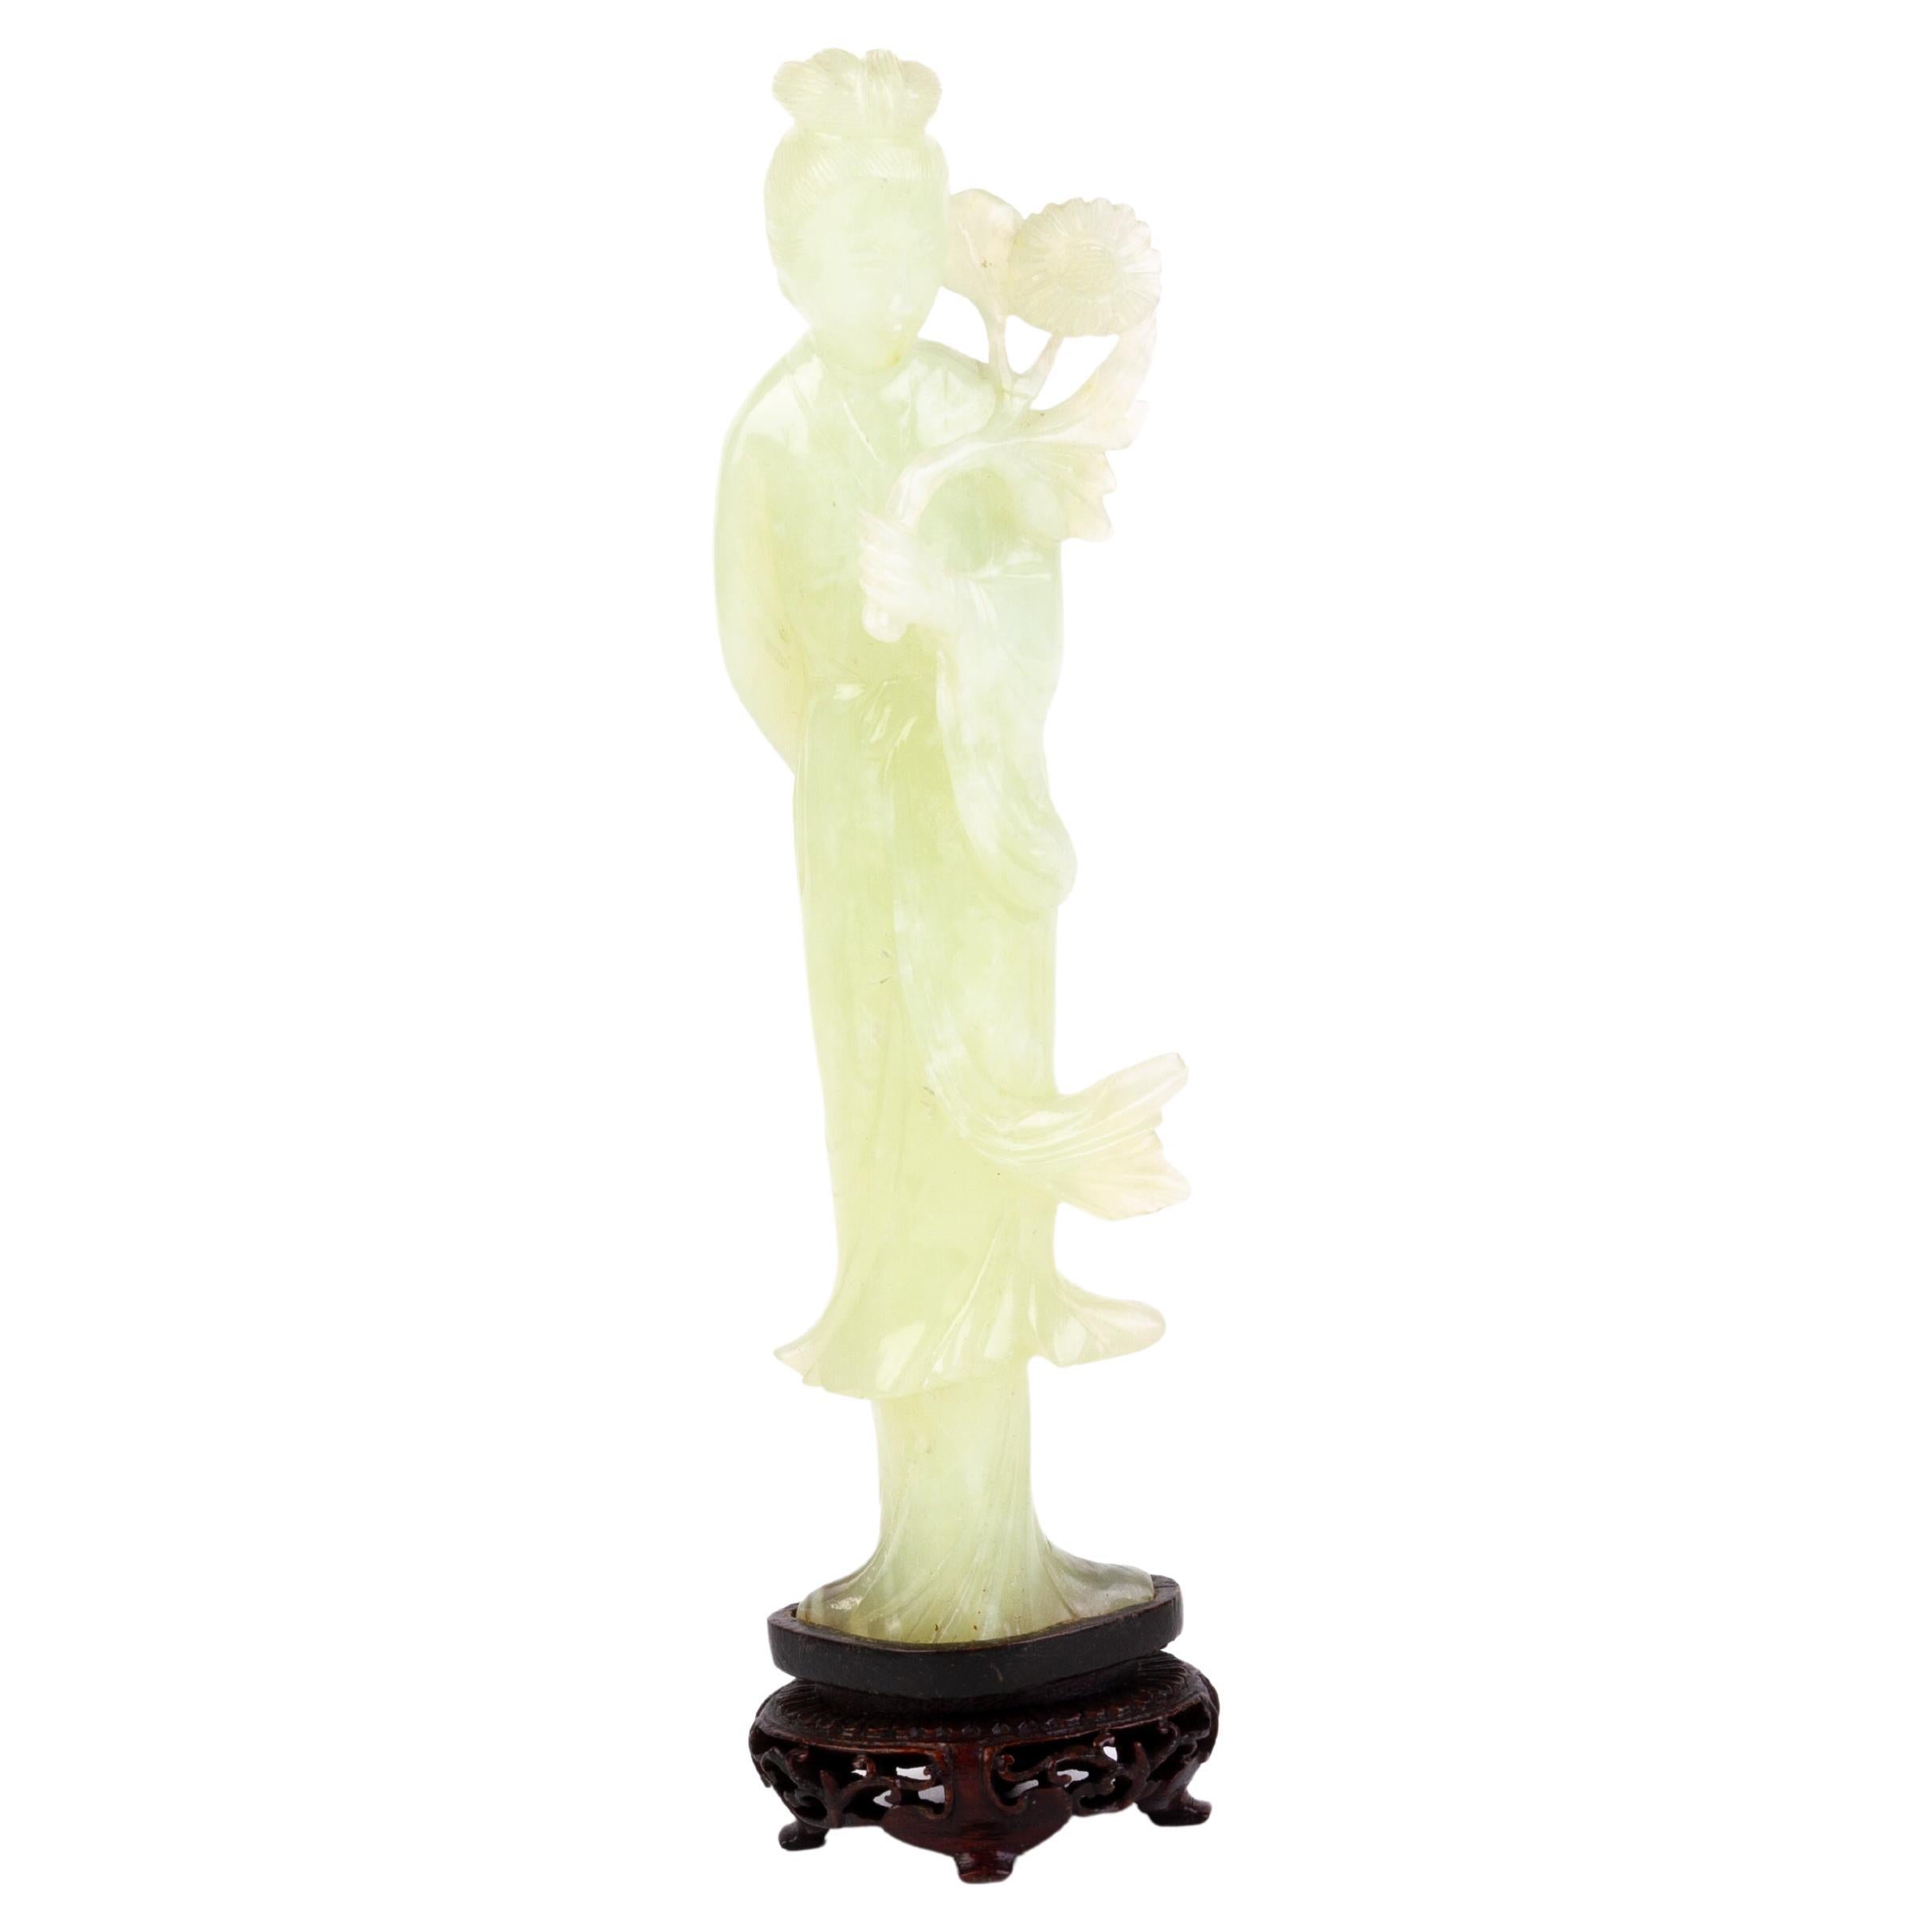 Chinese Qing Dynasty Carved Jade Quanyin Sculpture on Stand 19th Century 